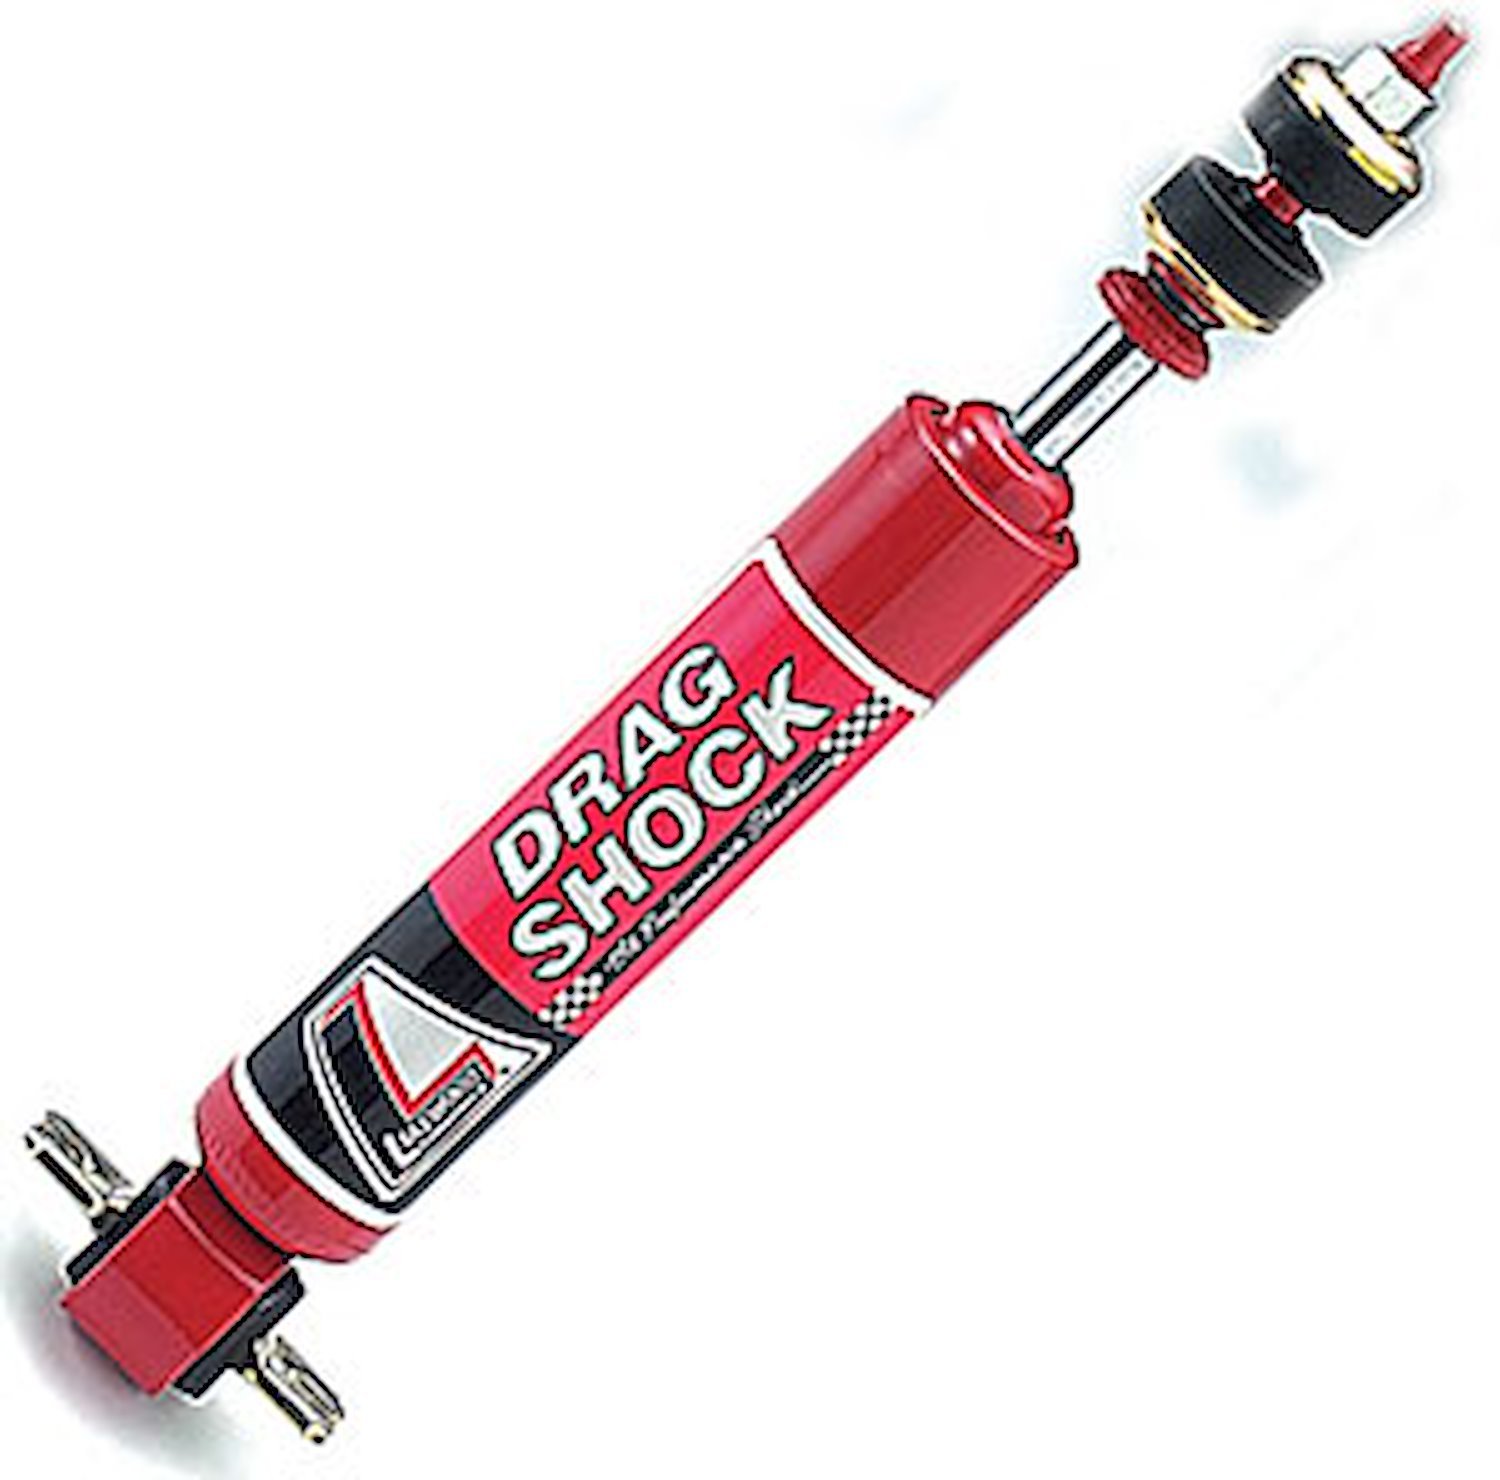 90/10 Front Shock 1967-1988 Buick/Chevy/Oldsmobile/Pontiac Cars & 1982-2004 Chevy S10/GMC S15